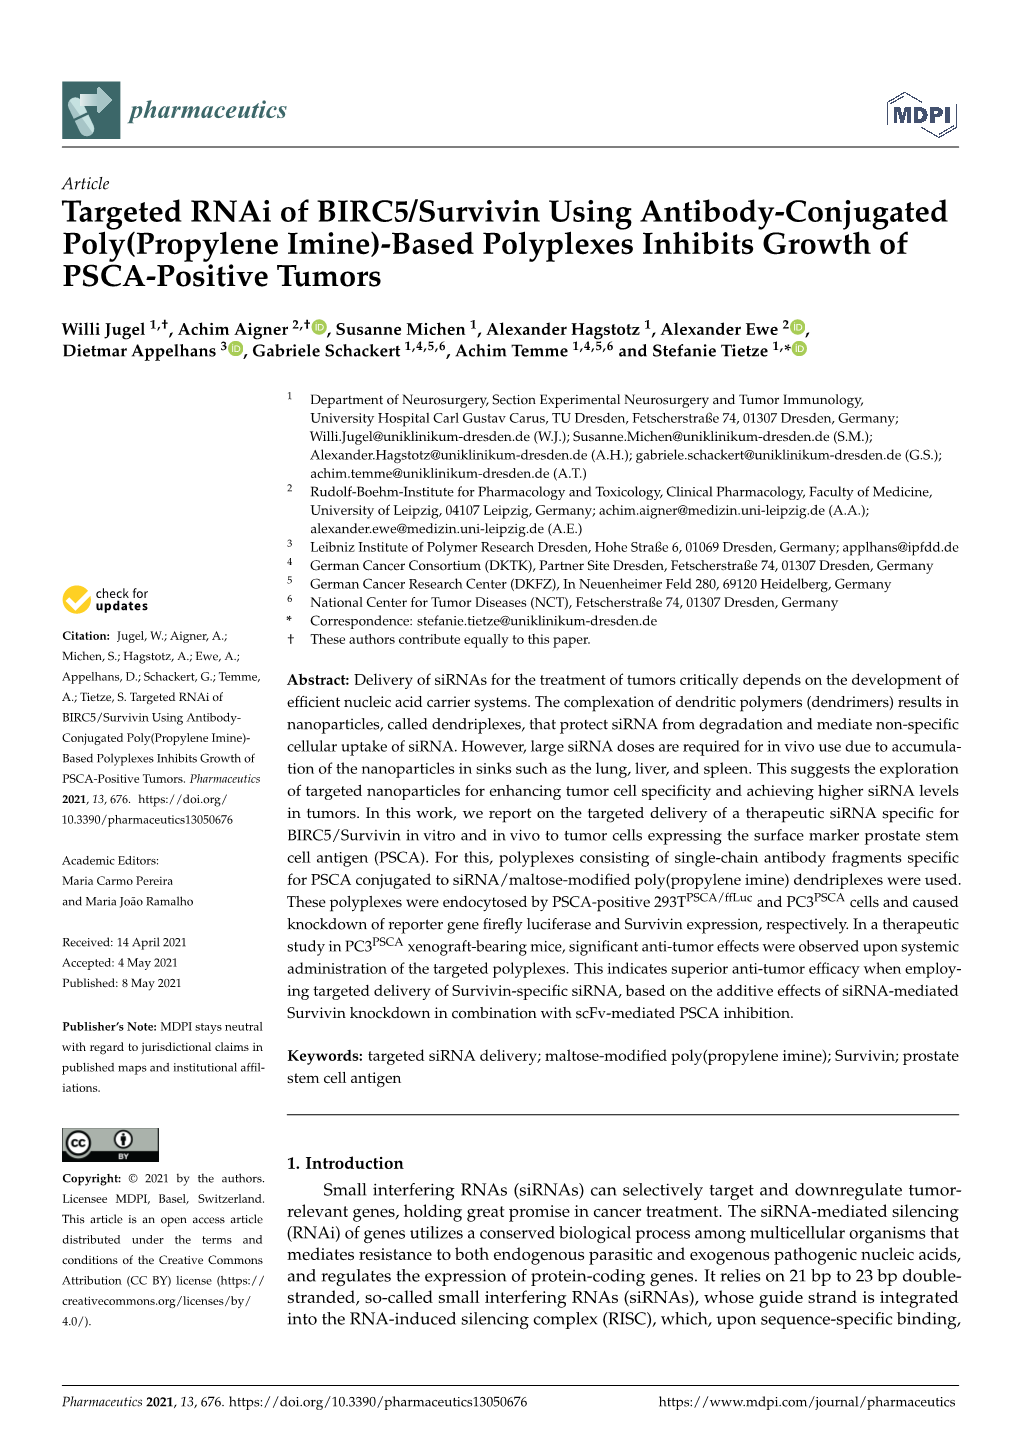 Targeted Rnai of BIRC5/Survivin Using Antibody-Conjugated Poly(Propylene Imine)-Based Polyplexes Inhibits Growth of PSCA-Positive Tumors